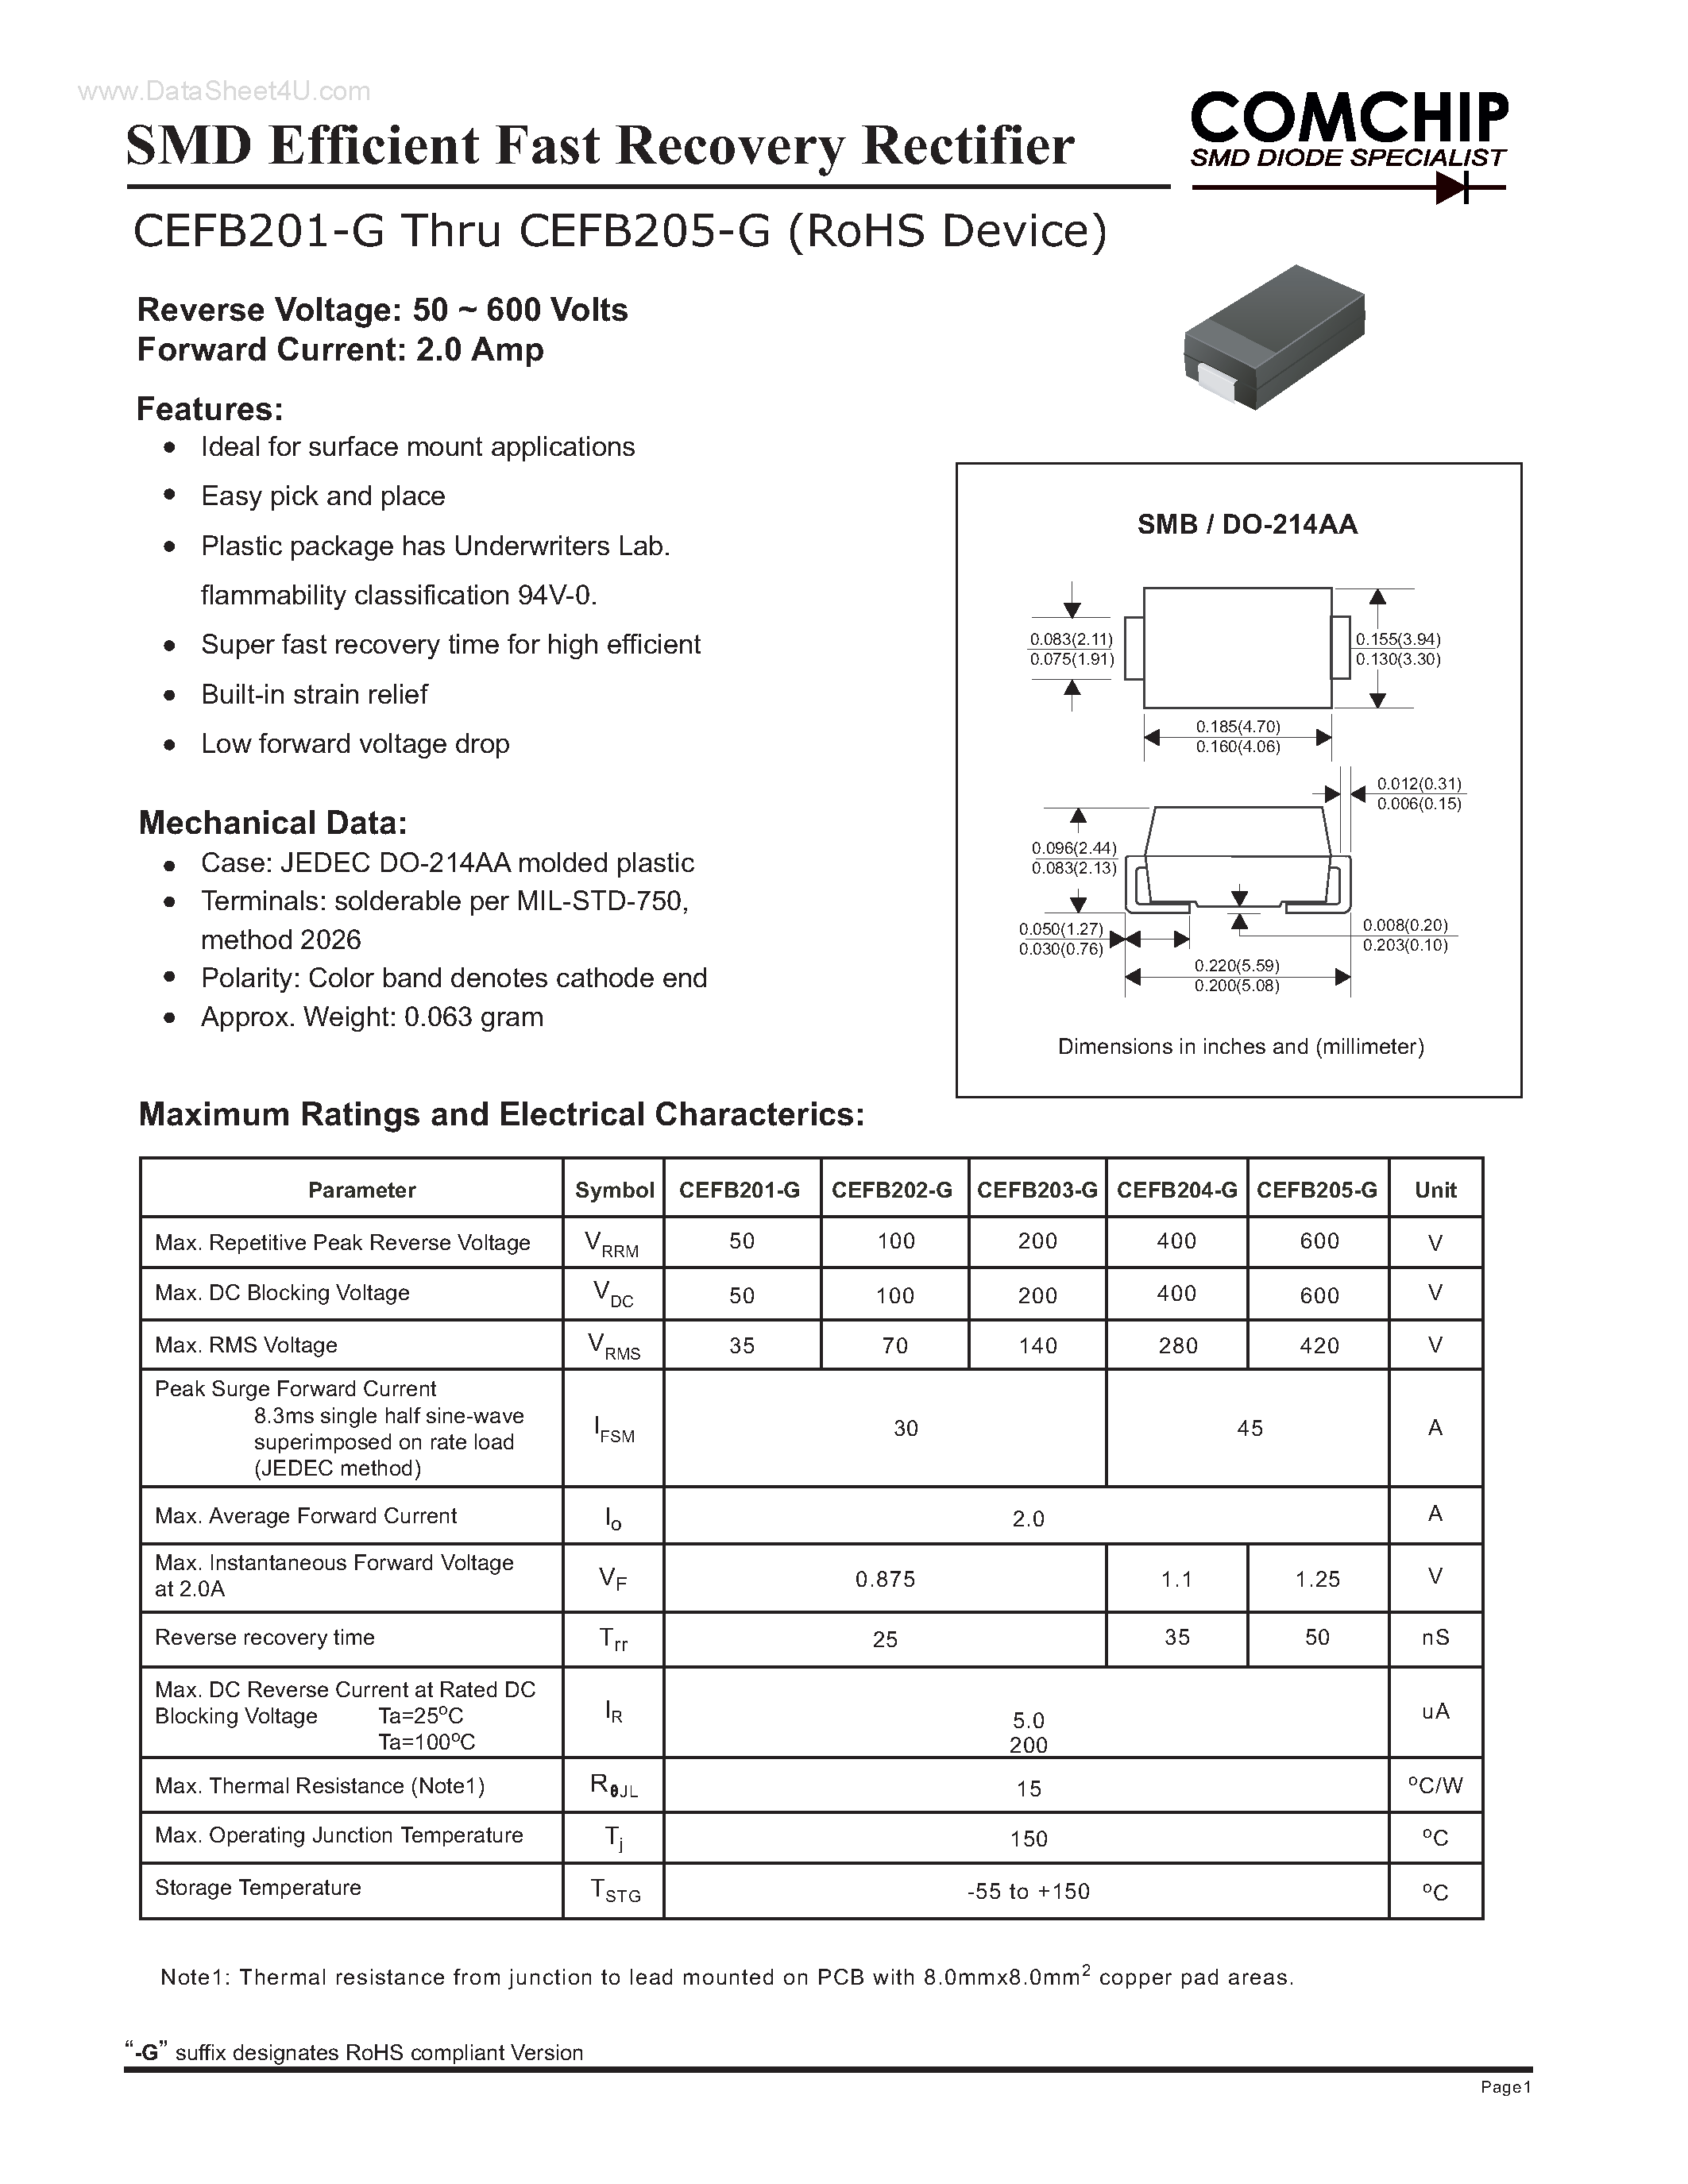 Даташит CEFB201-G - (CEFB201-G - CEFB205-G) SMD Efficient Fast Recovery Rectifier страница 1